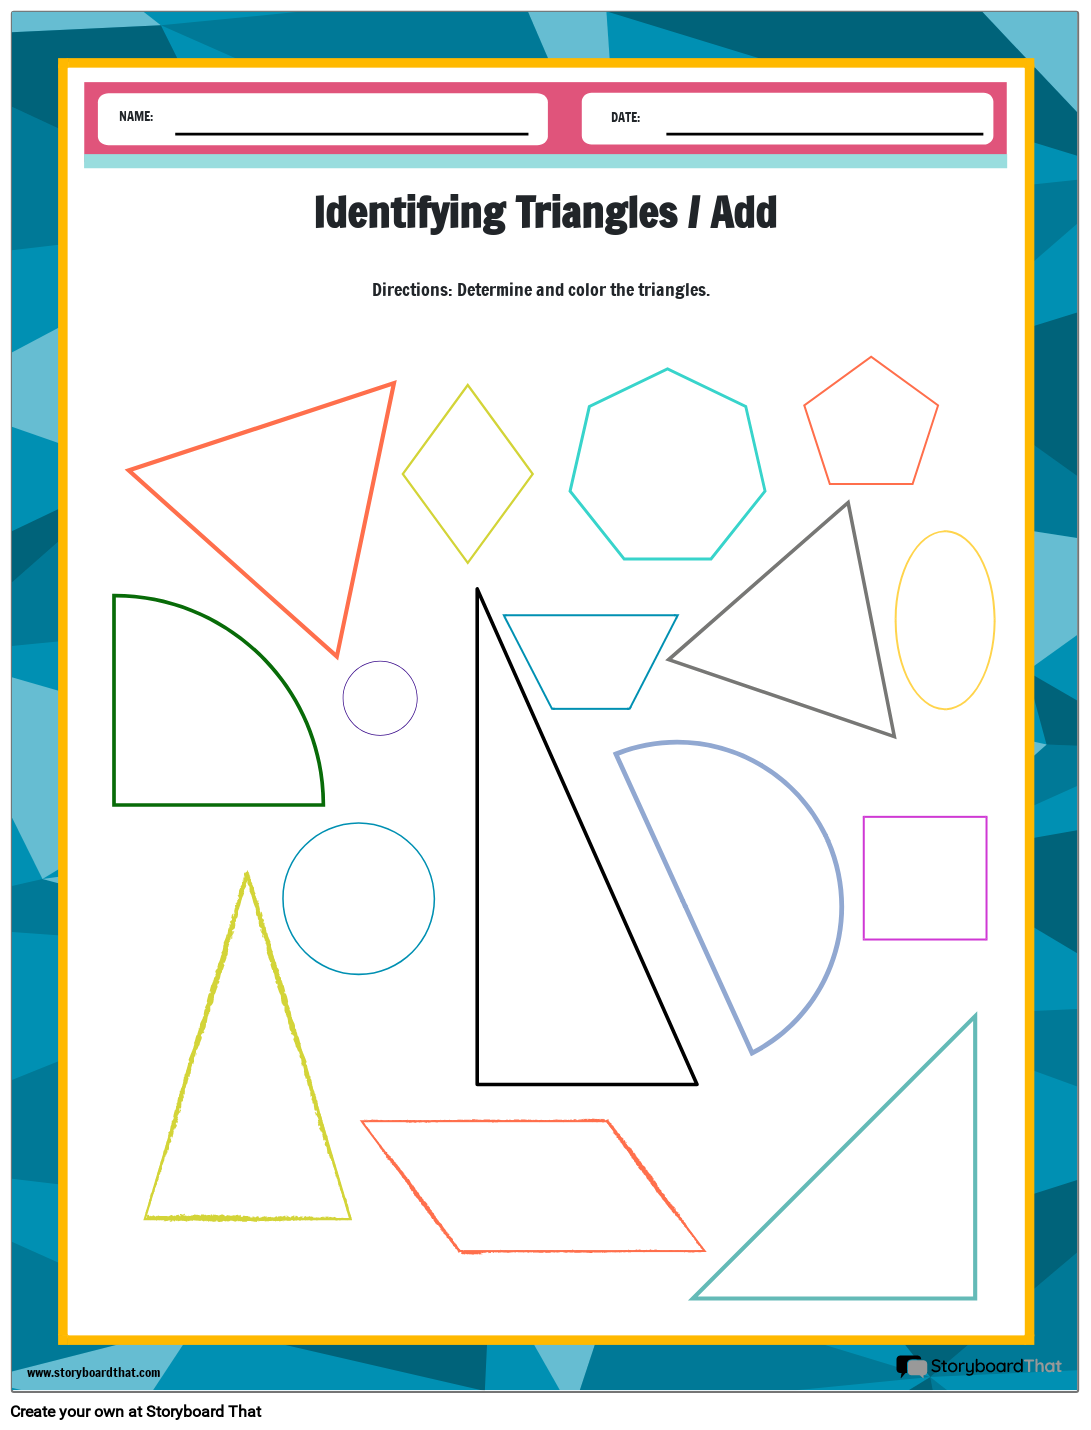 Coloring Triangle Worksheet: Equilateral Triangle, Isosceles Triangle, Scalene 